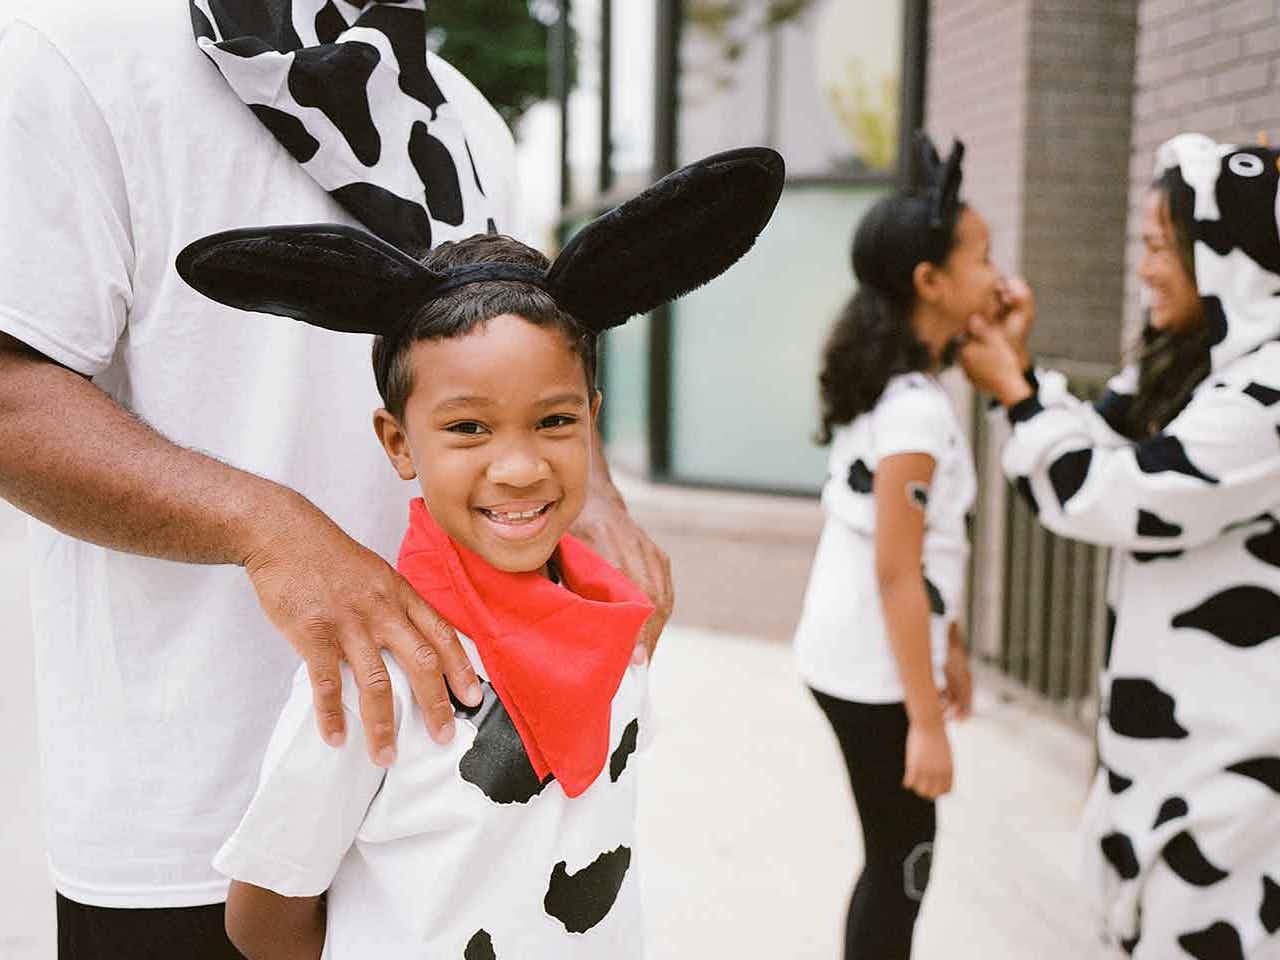 family wearing cow costumes for chick-fil-a cow appreciation day